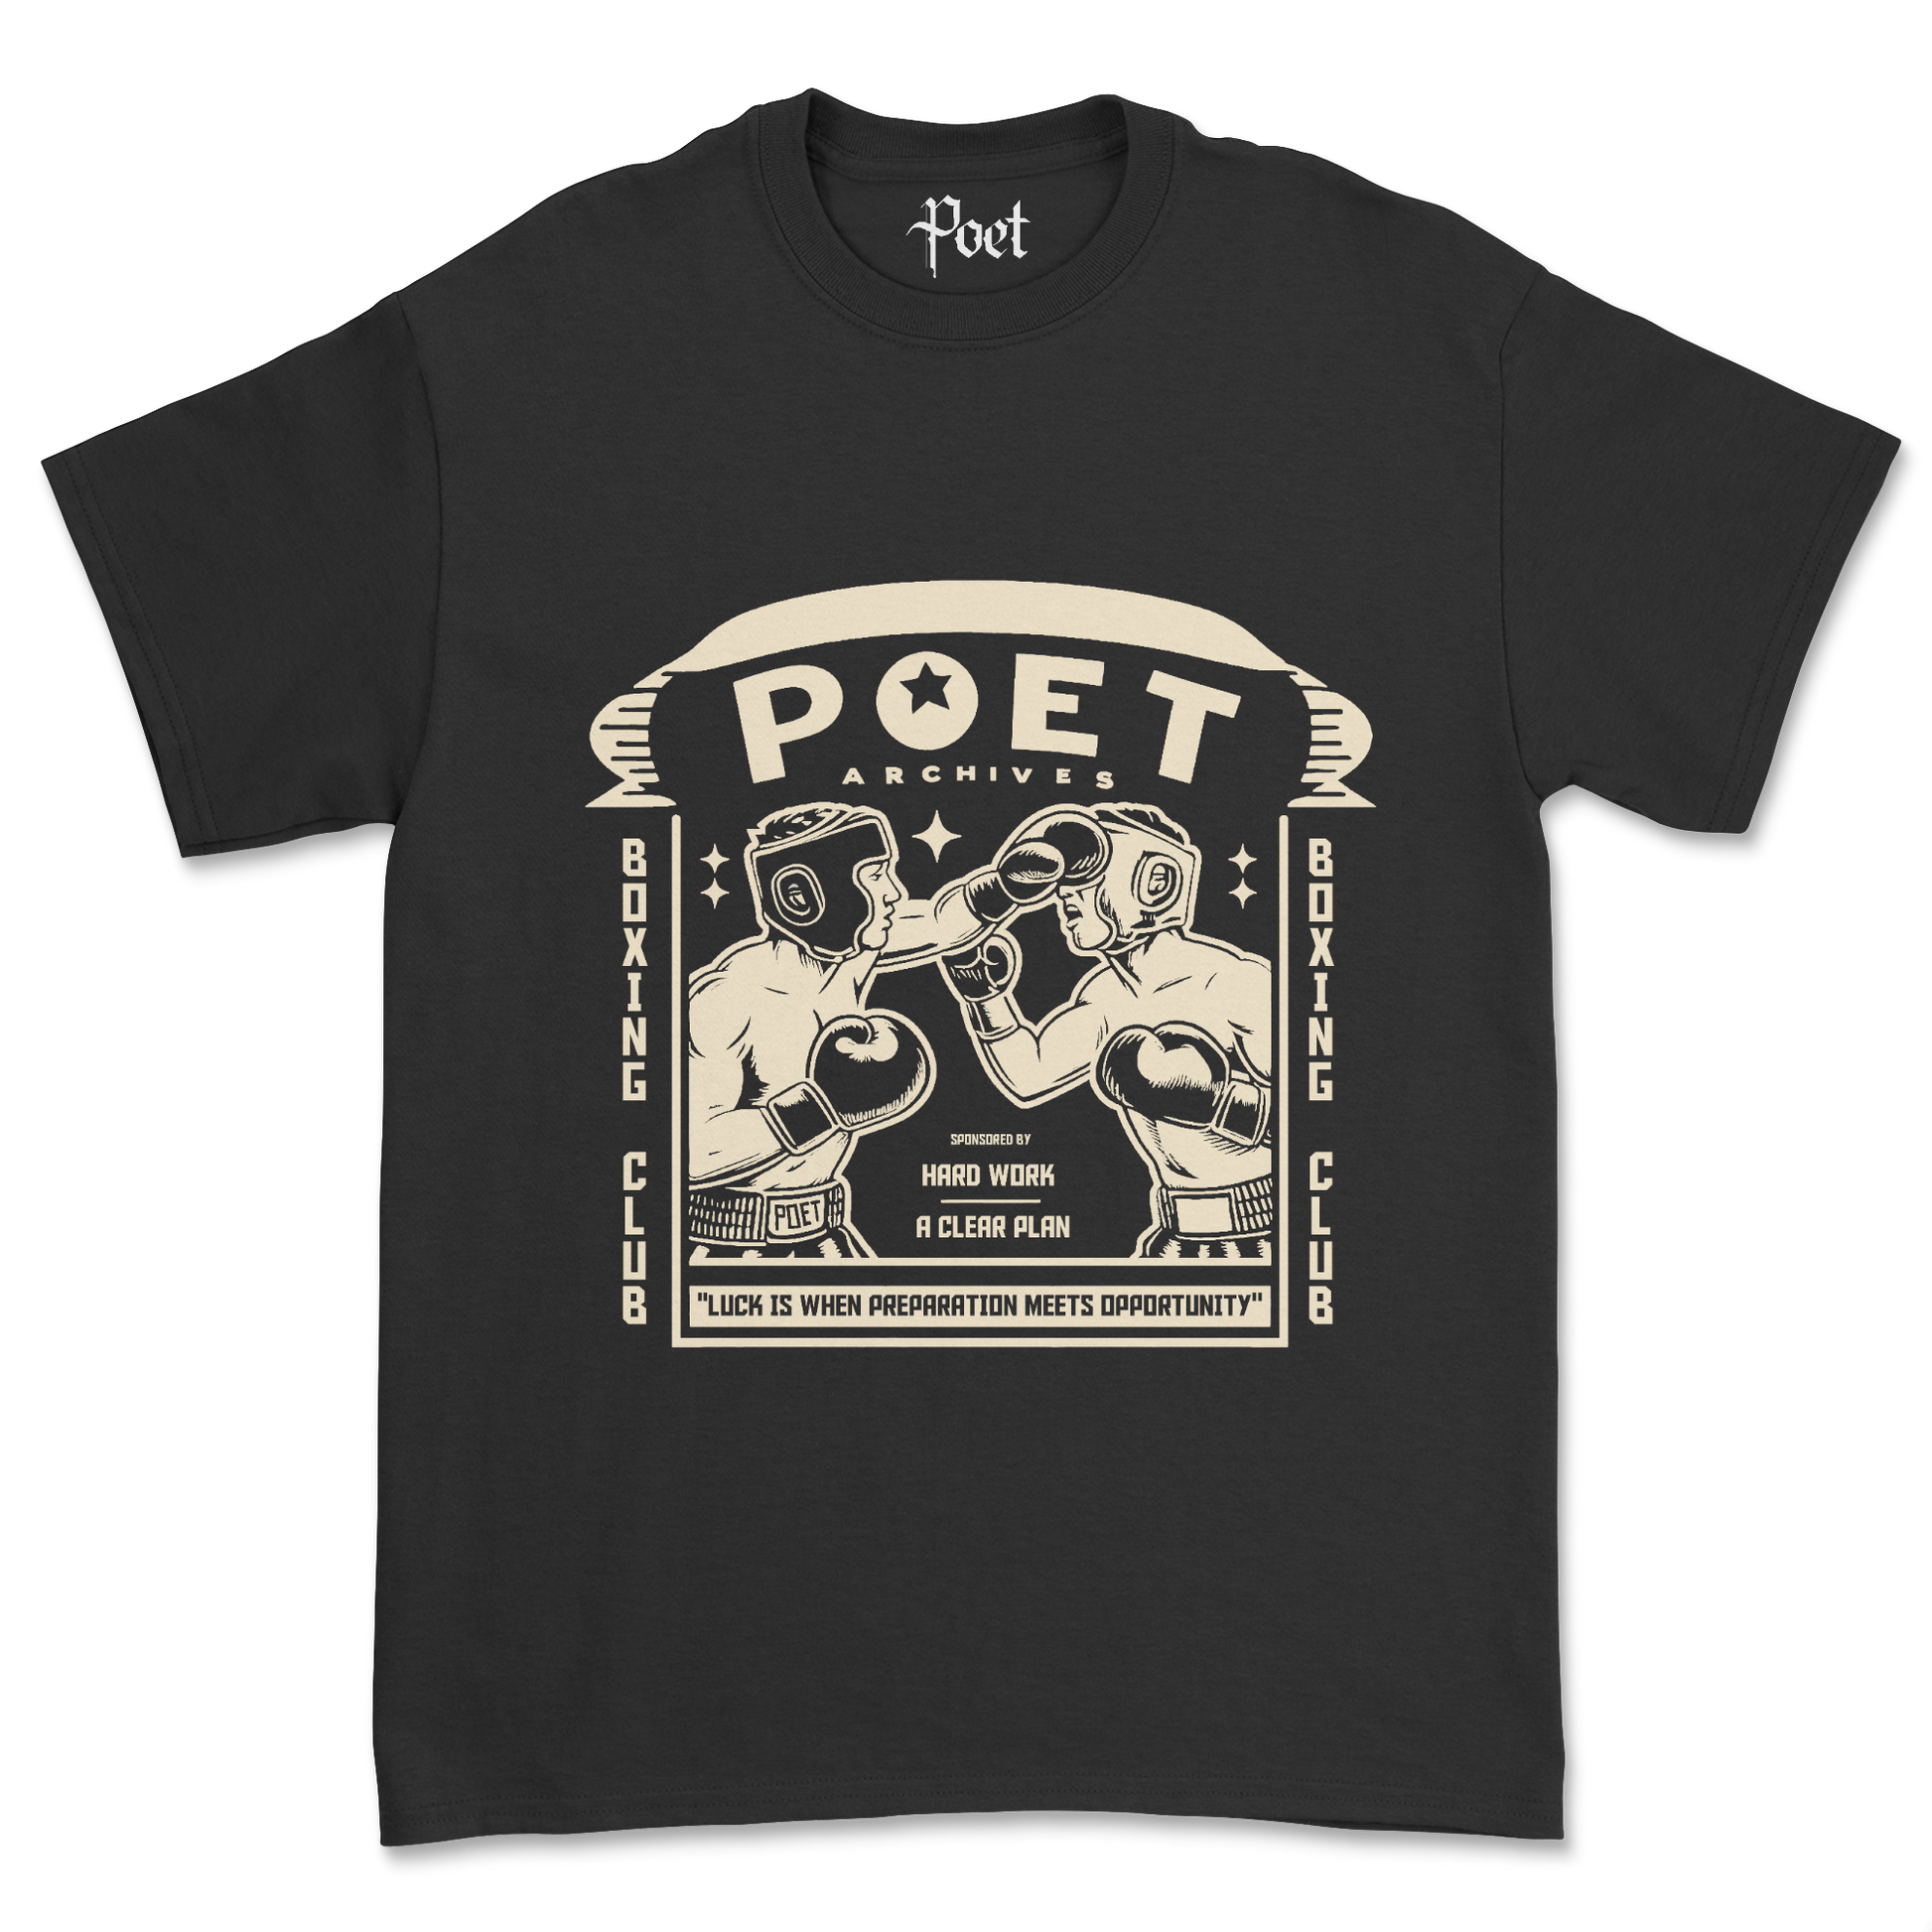 Boxing Club T-Shirt - Poet Archives